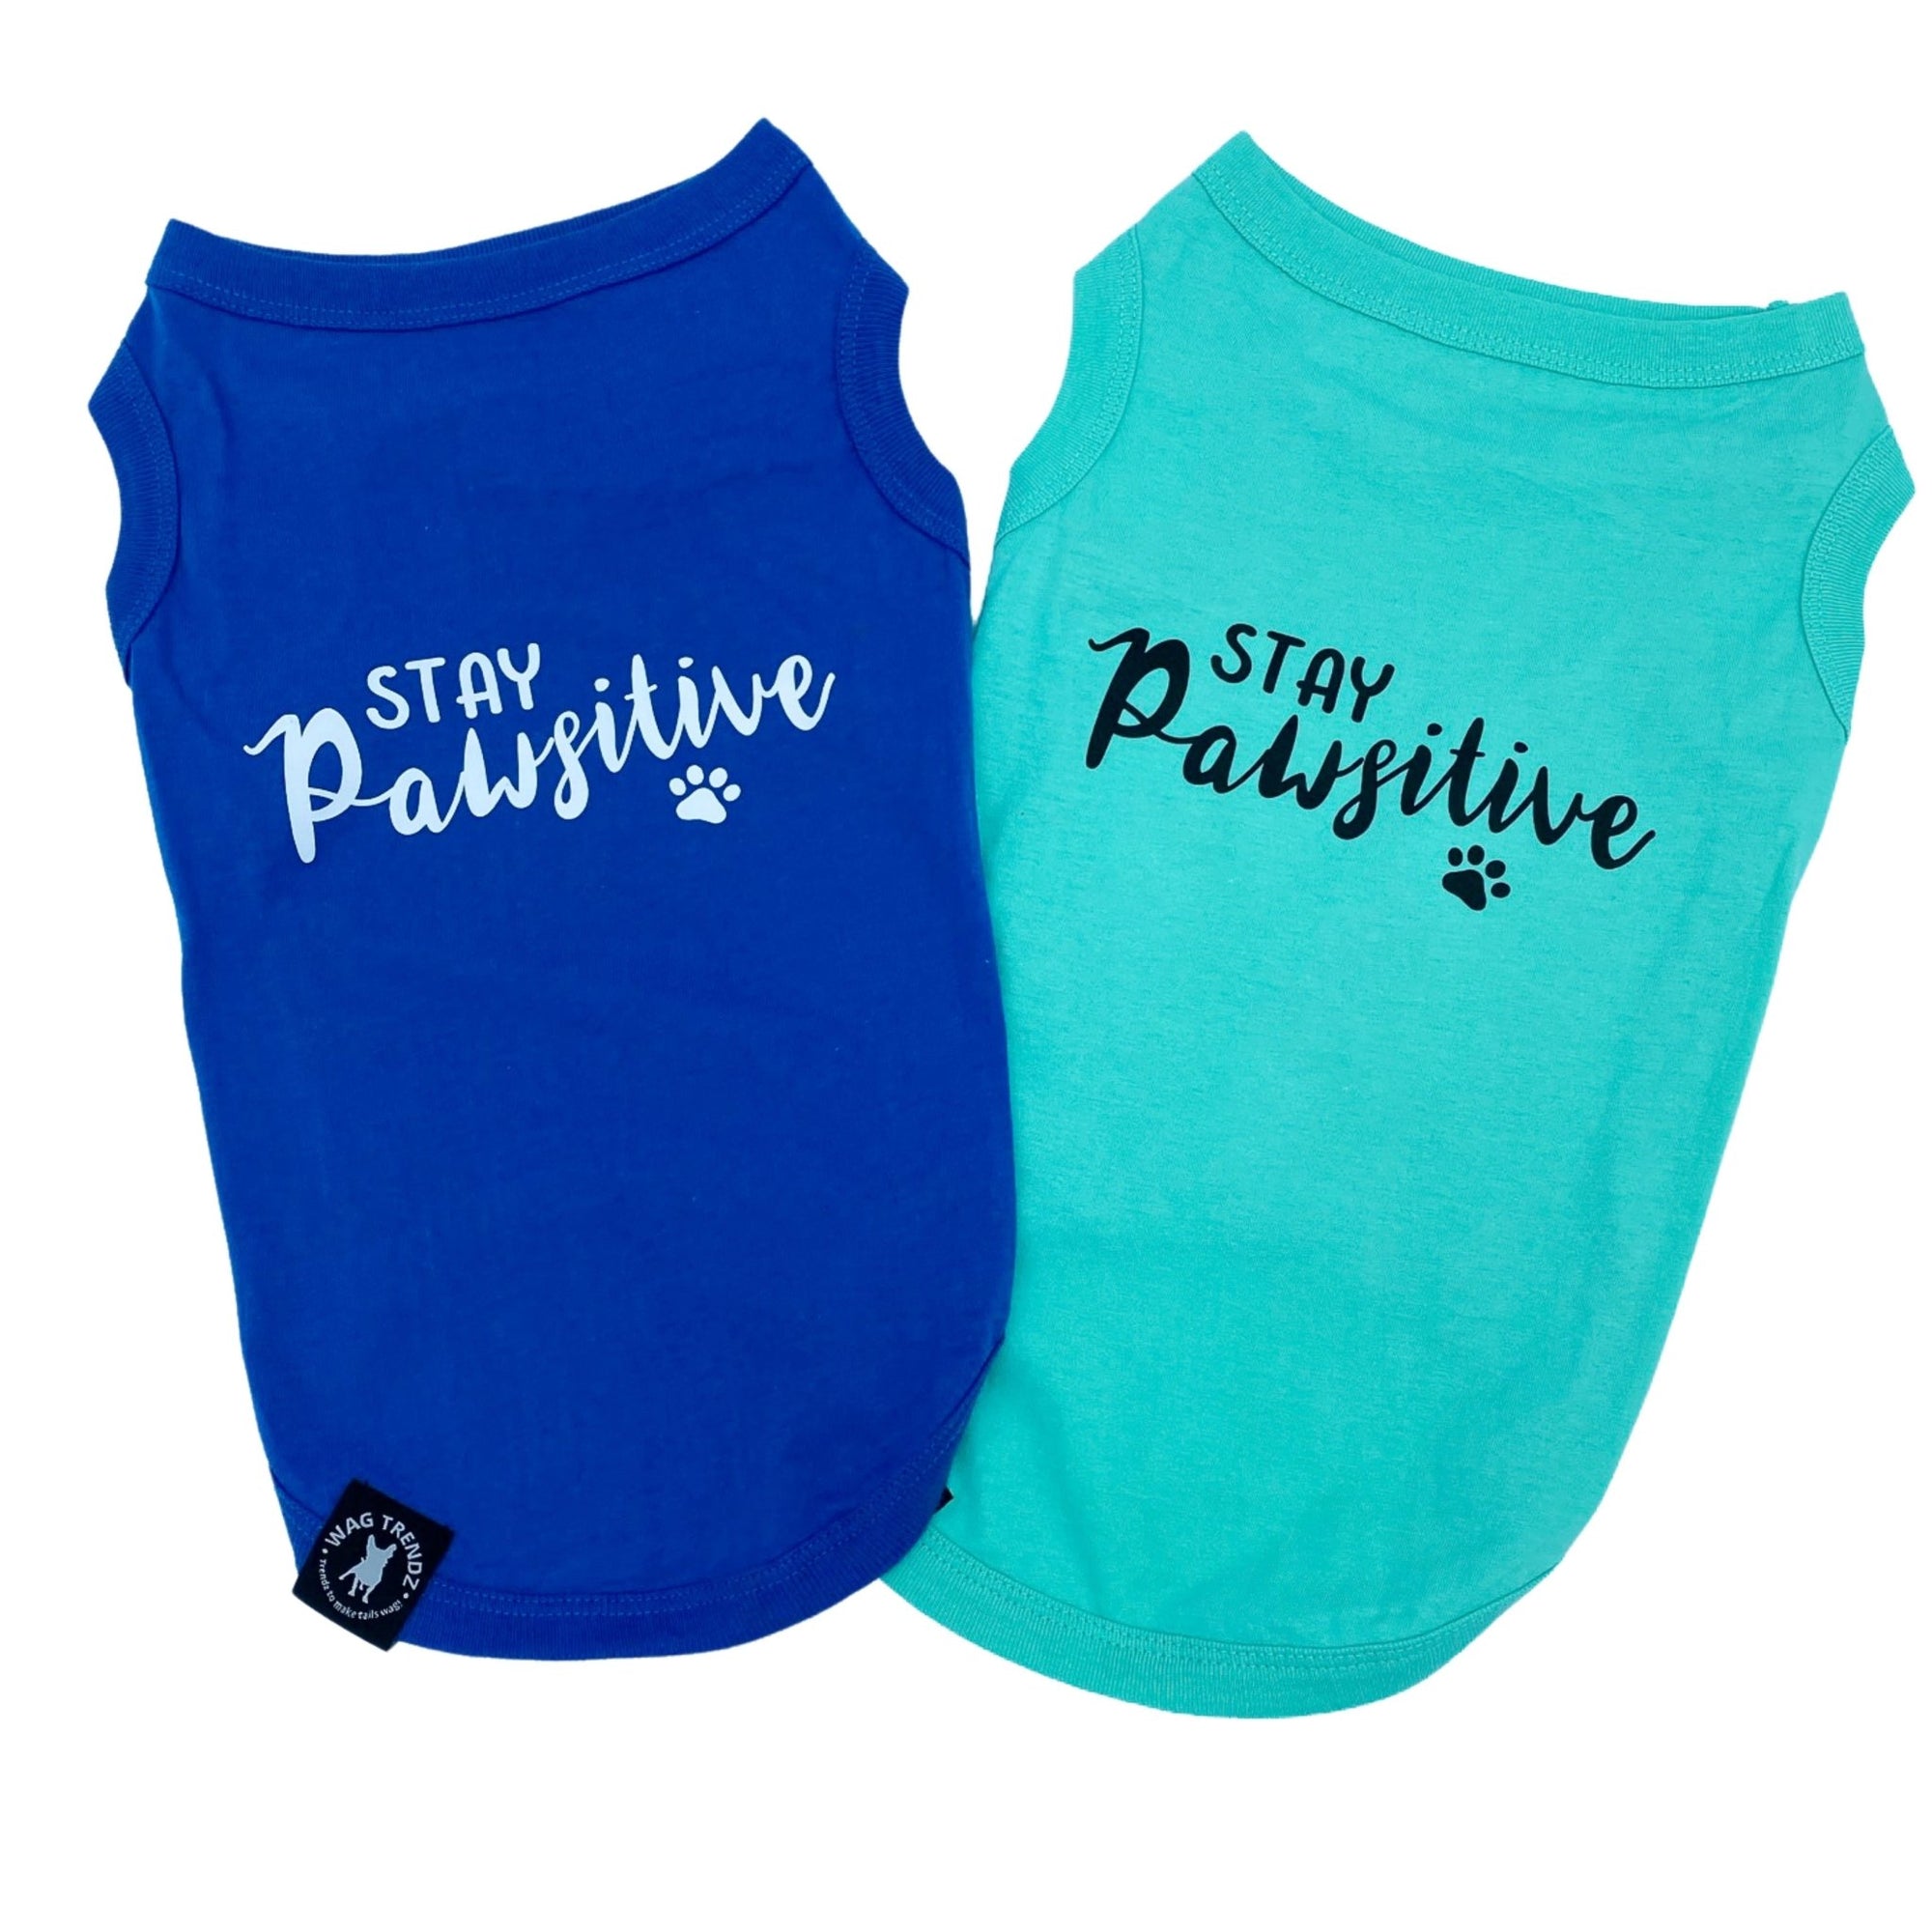 Dog T-Shirt - &quot;Stay Pawsitive&quot; - Royal Blue and Teal dog t-shirts - Stay Pawsitive lettering in white with paw print on blue t-shirt and lettering in black with paw print on teal t-shirt - against solid white background - Wag Trendz